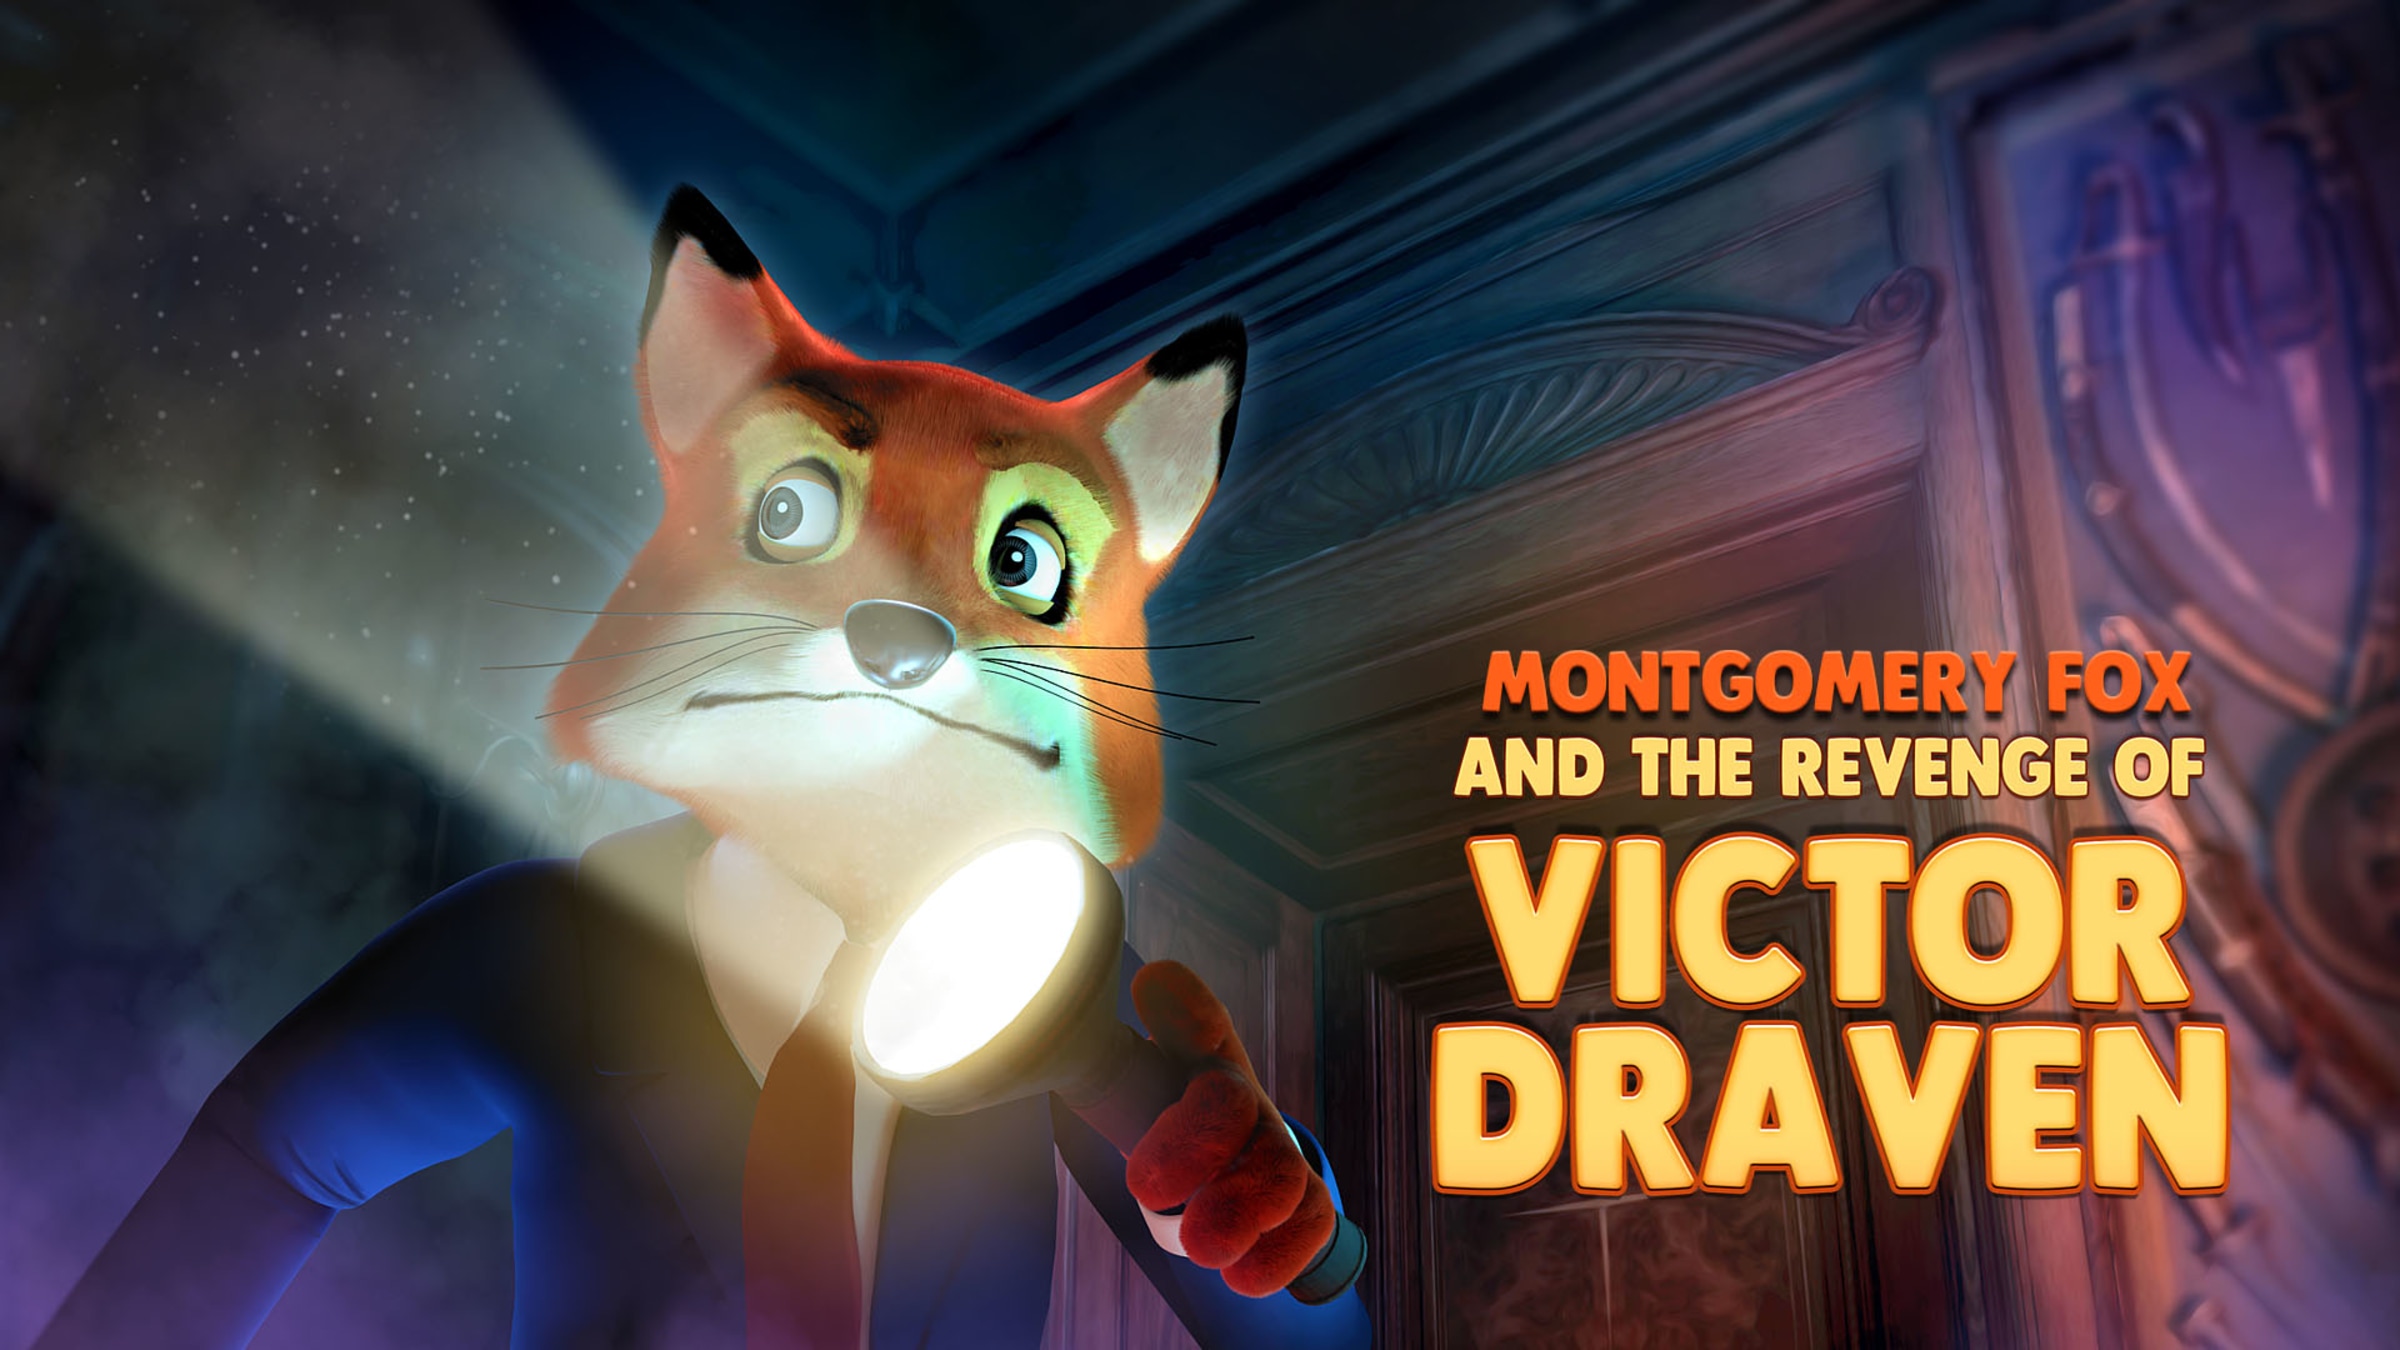 https://assets.nintendo.com/image/upload/c_fill,w_1200/q_auto:best/f_auto/dpr_2.0/ncom/en_US/games/switch/m/montgomery-fox-and-the-revenge-of-victor-draven-switch/